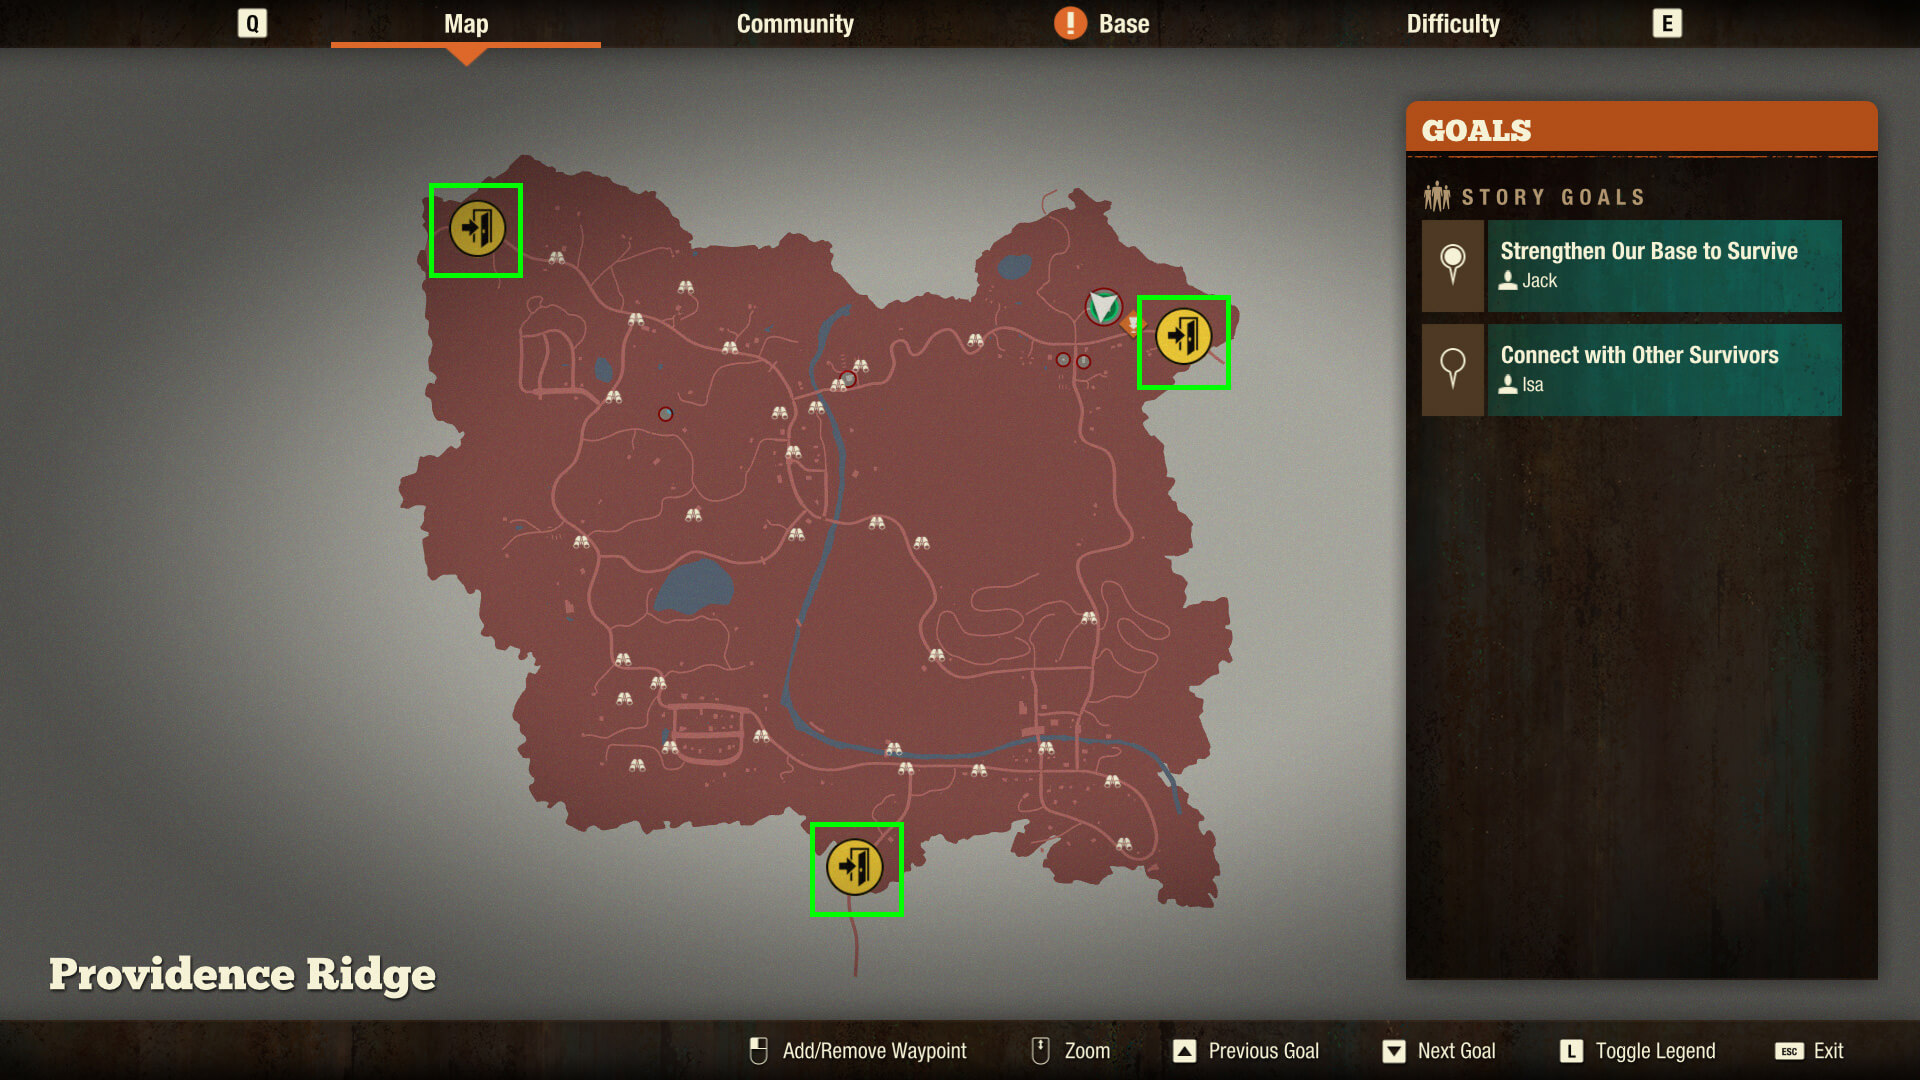 State of Decay 2: How Multiple Play-Throughs Work – Dragonchasers